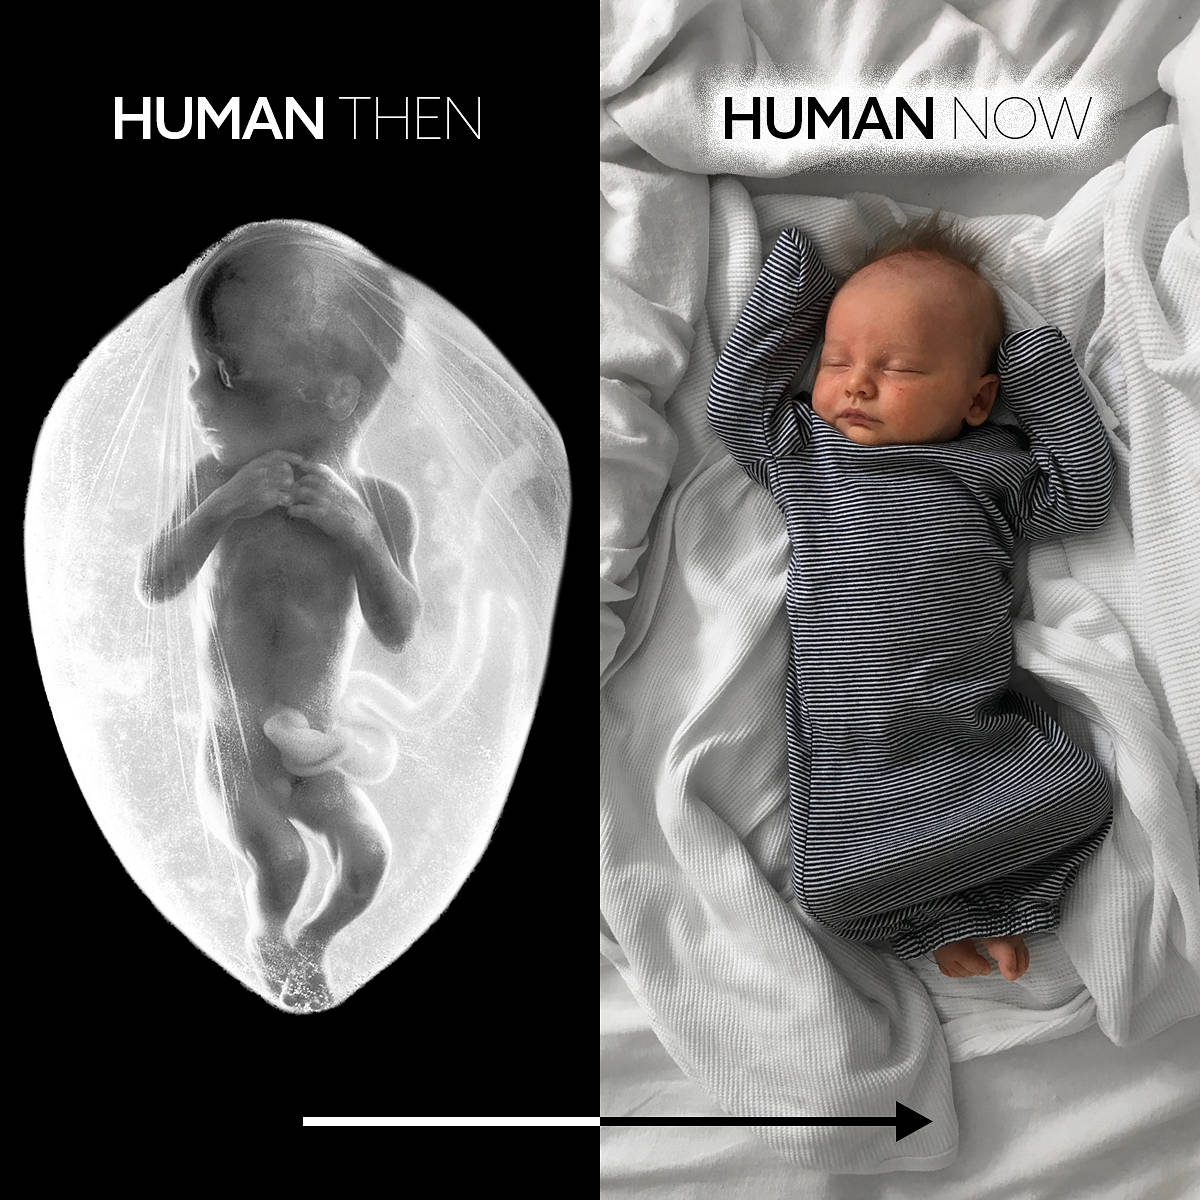 Human Then, Human Now